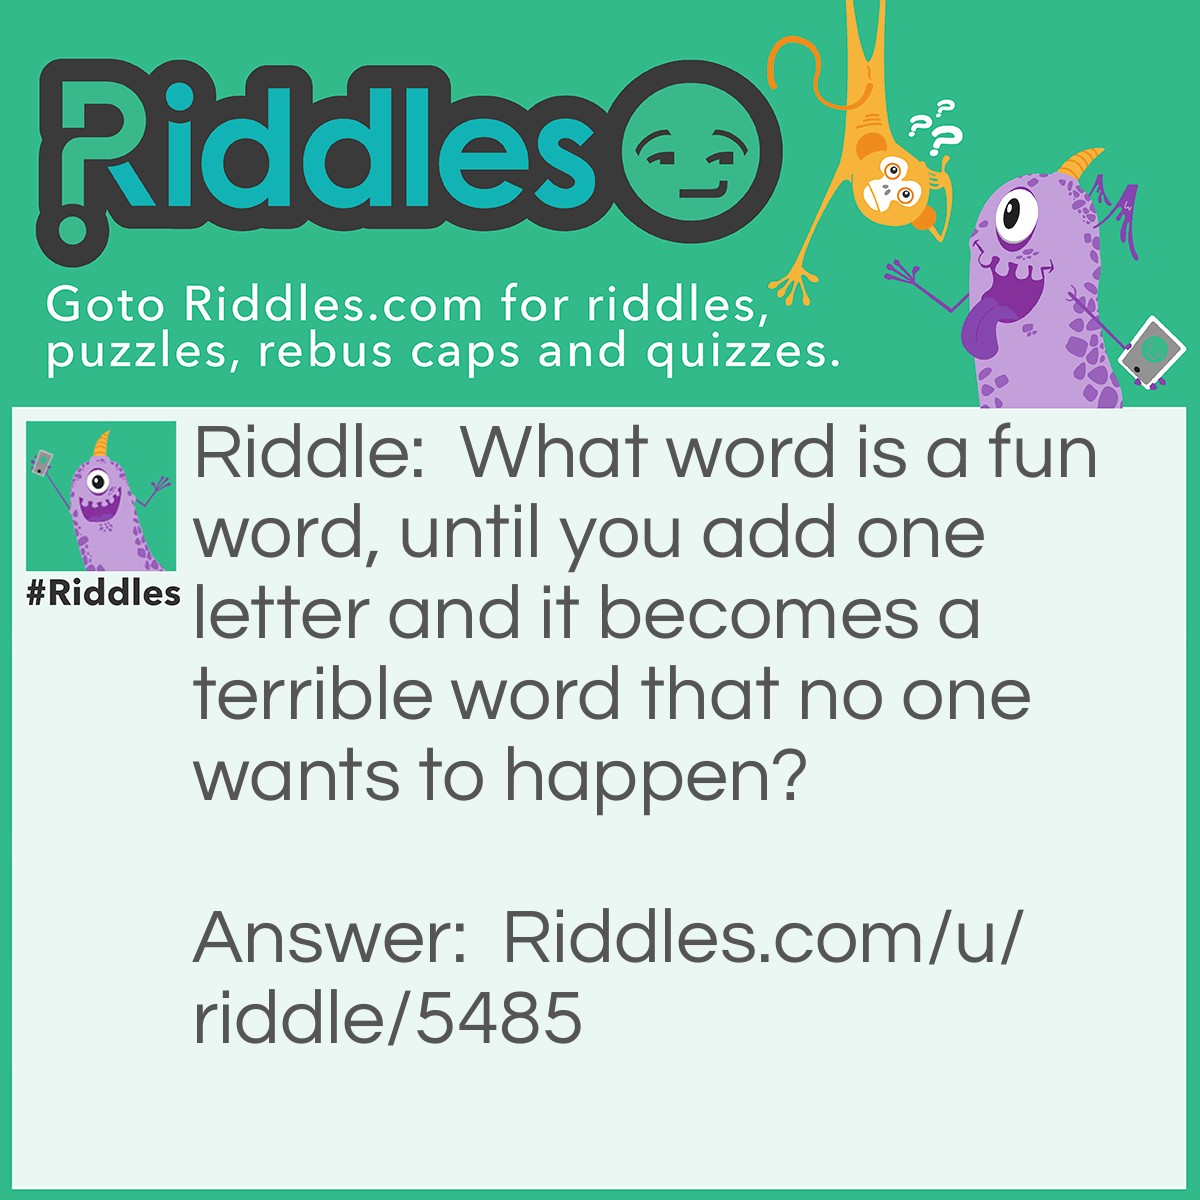 Riddle: What word is a fun word, until you add one letter and it becomes a terrible word that no one wants to happen? Answer: <a href="https://www.riddles.com/funny-riddles"><strong>Laughter</strong></a>: If you add an 'S' to the begging of laughter it becomes slaughter.